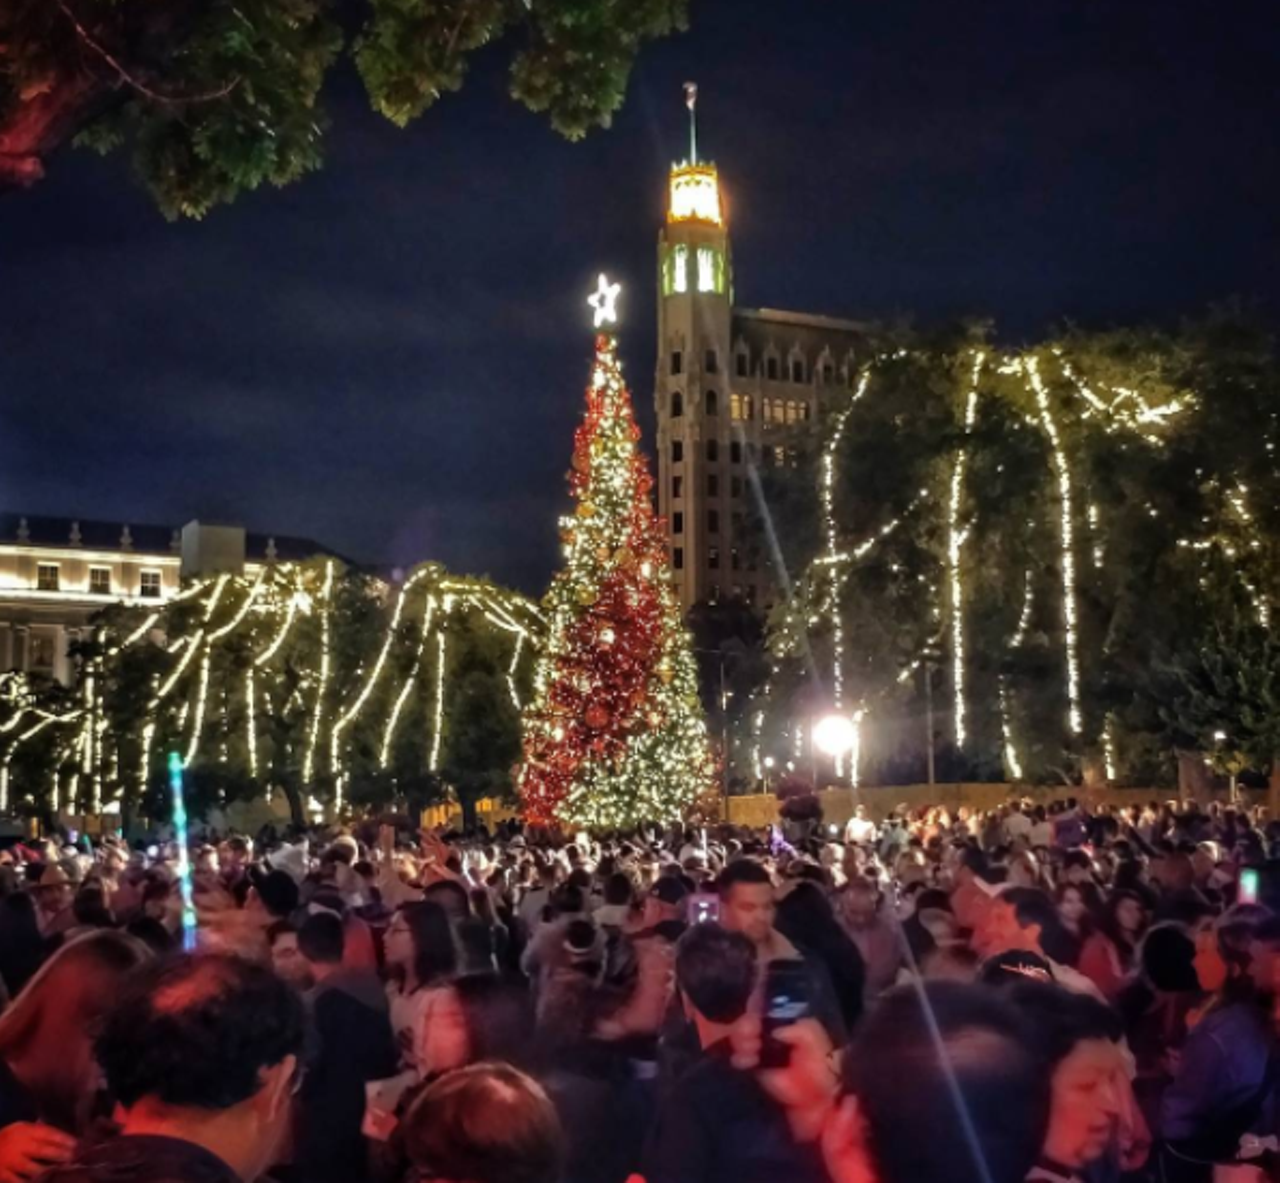 Alamo Plaza
Whether it's annual tradition or something totally new to you, be sure to make the trip downtown to check out the lights. You'll be glad you did.
Photo via Instagram,  vtchevalier